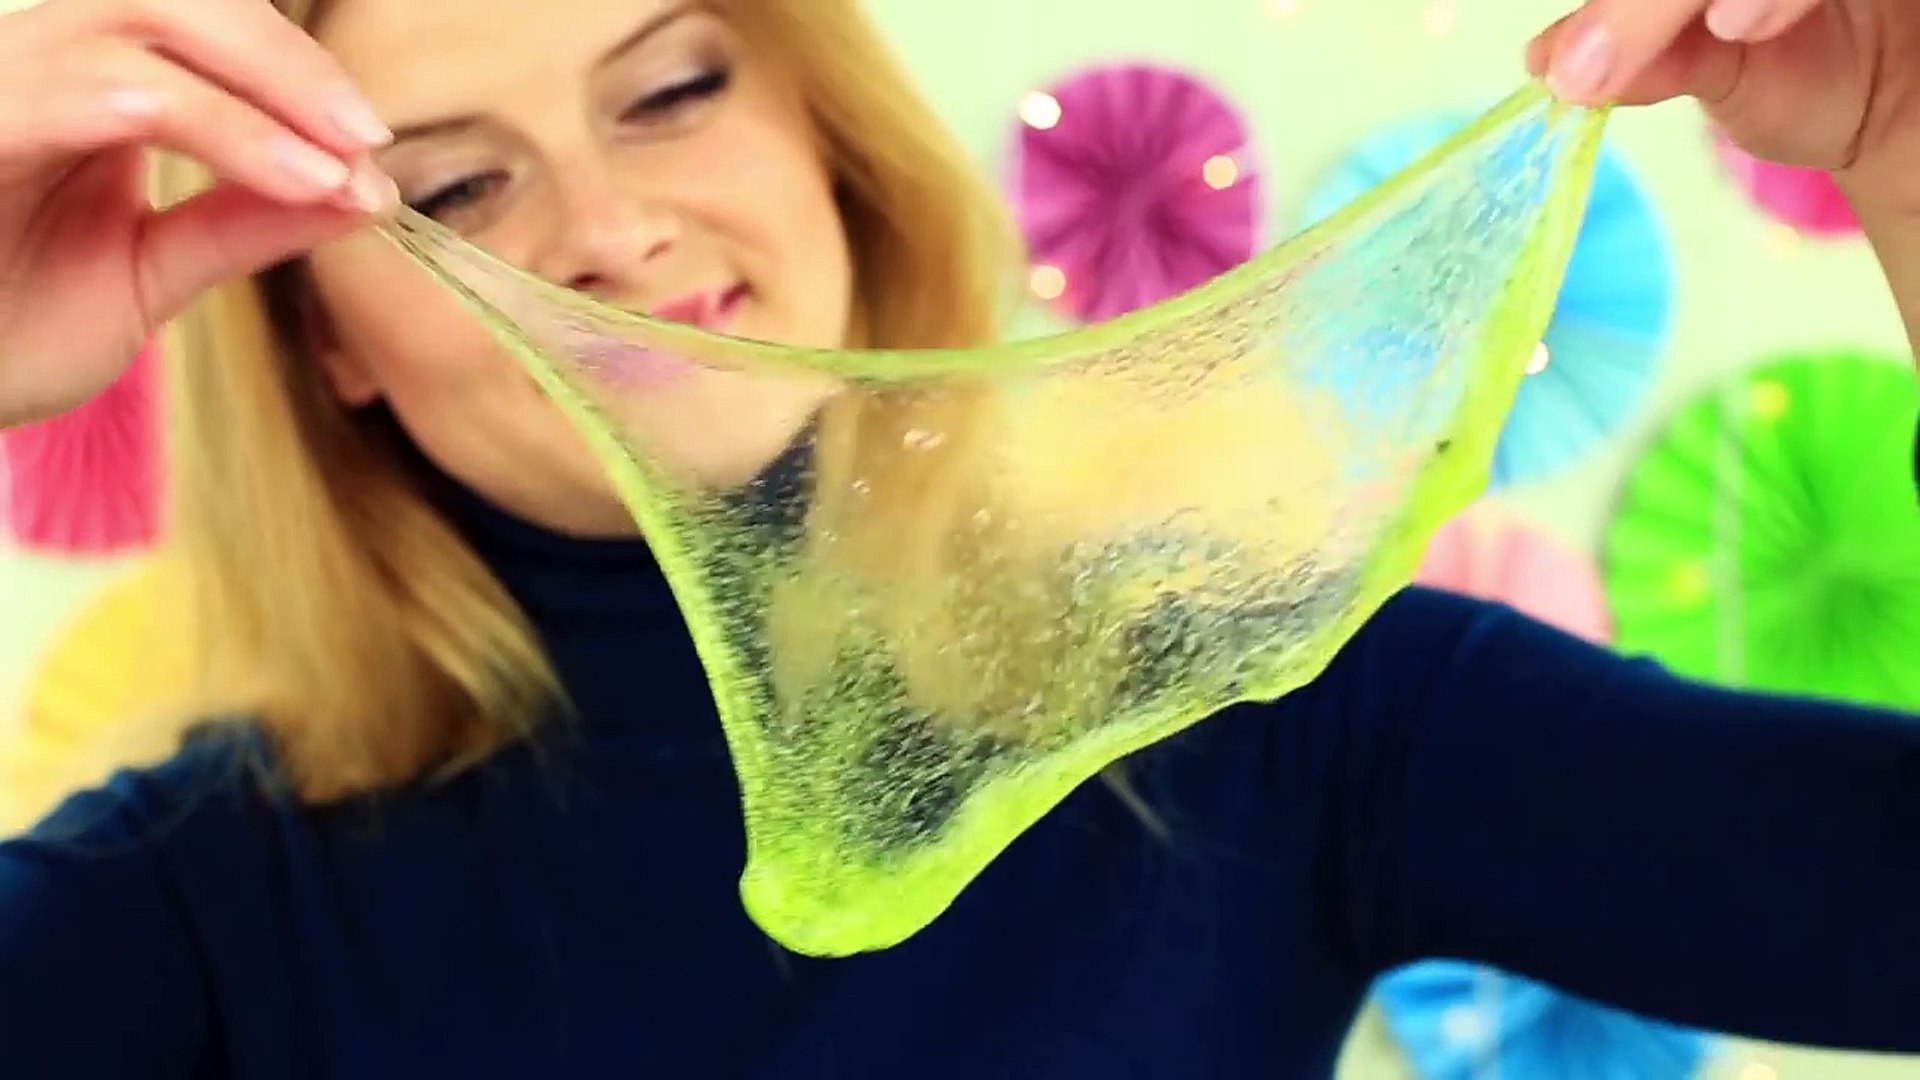 SAVONS FLUBBER - 6 RECETTES DIY - Video Dailymotion